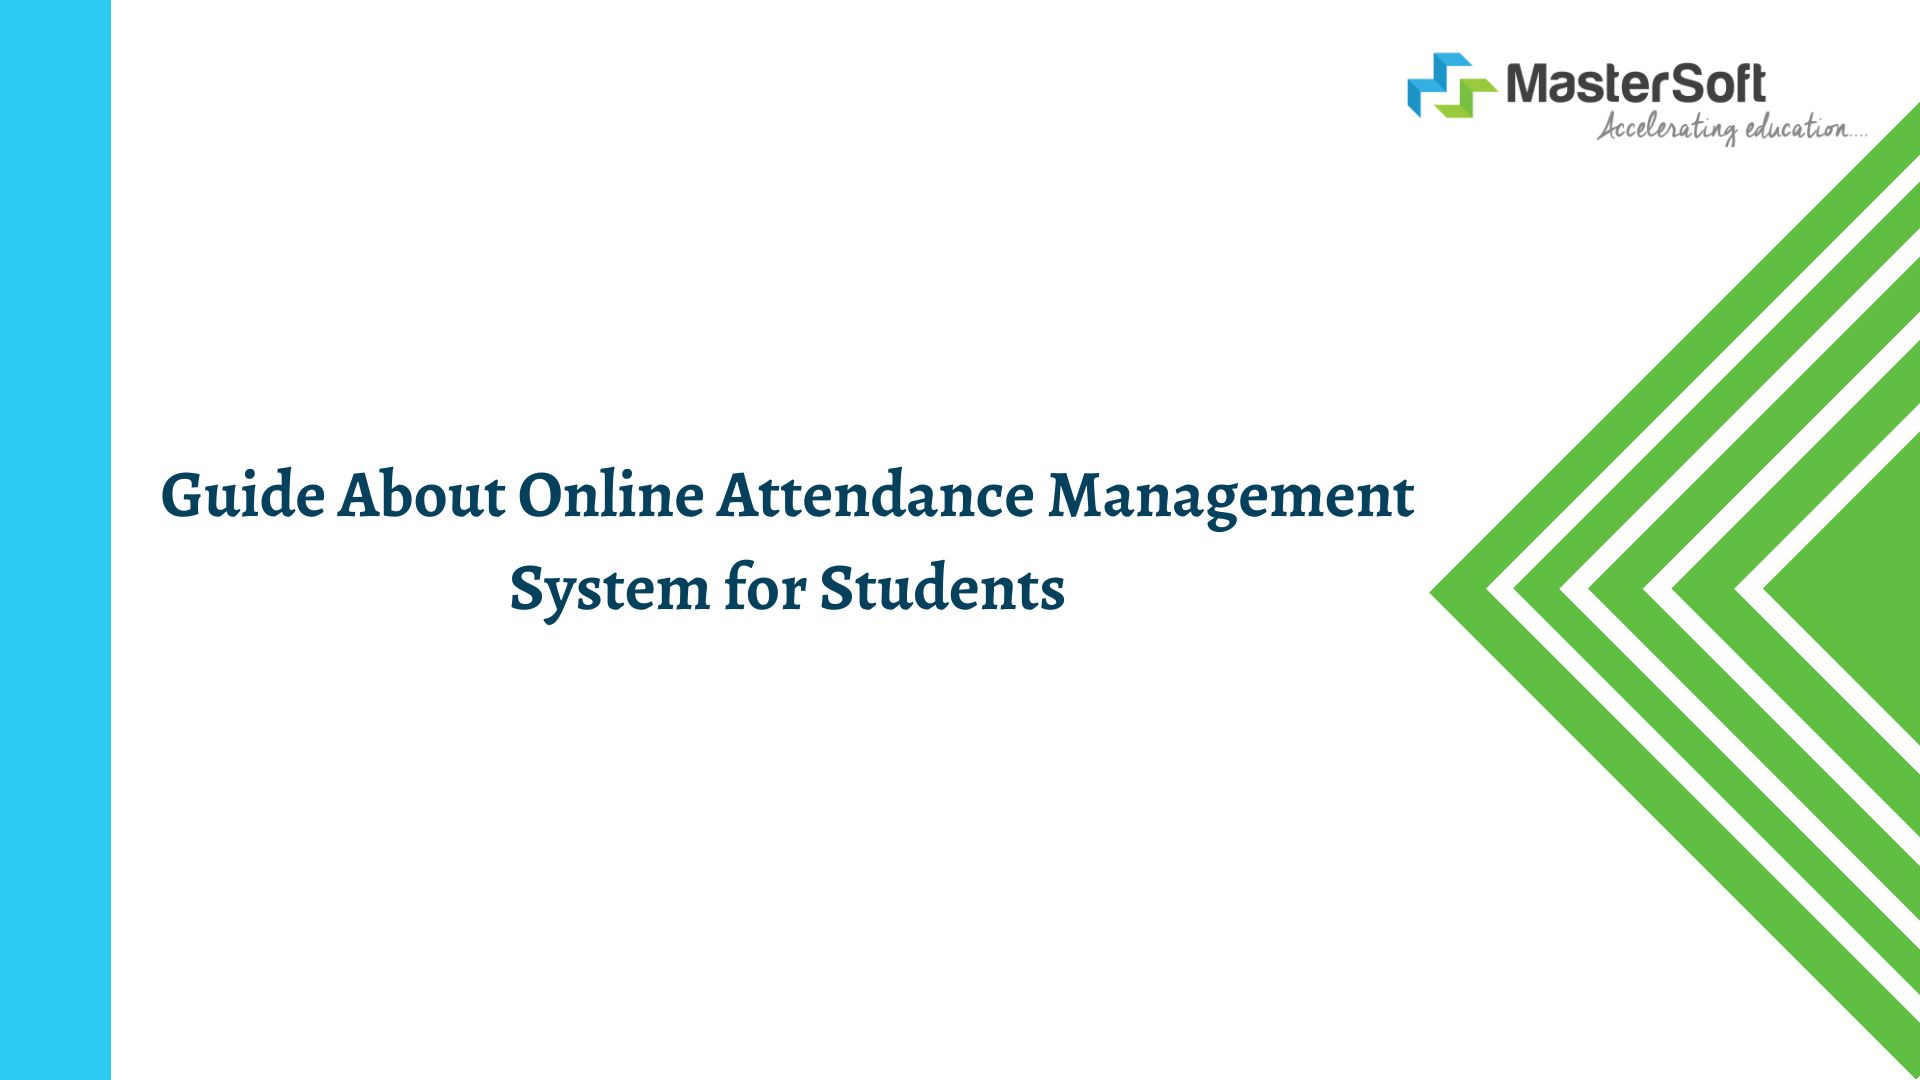 Guide About Online Attendance Management System for Students